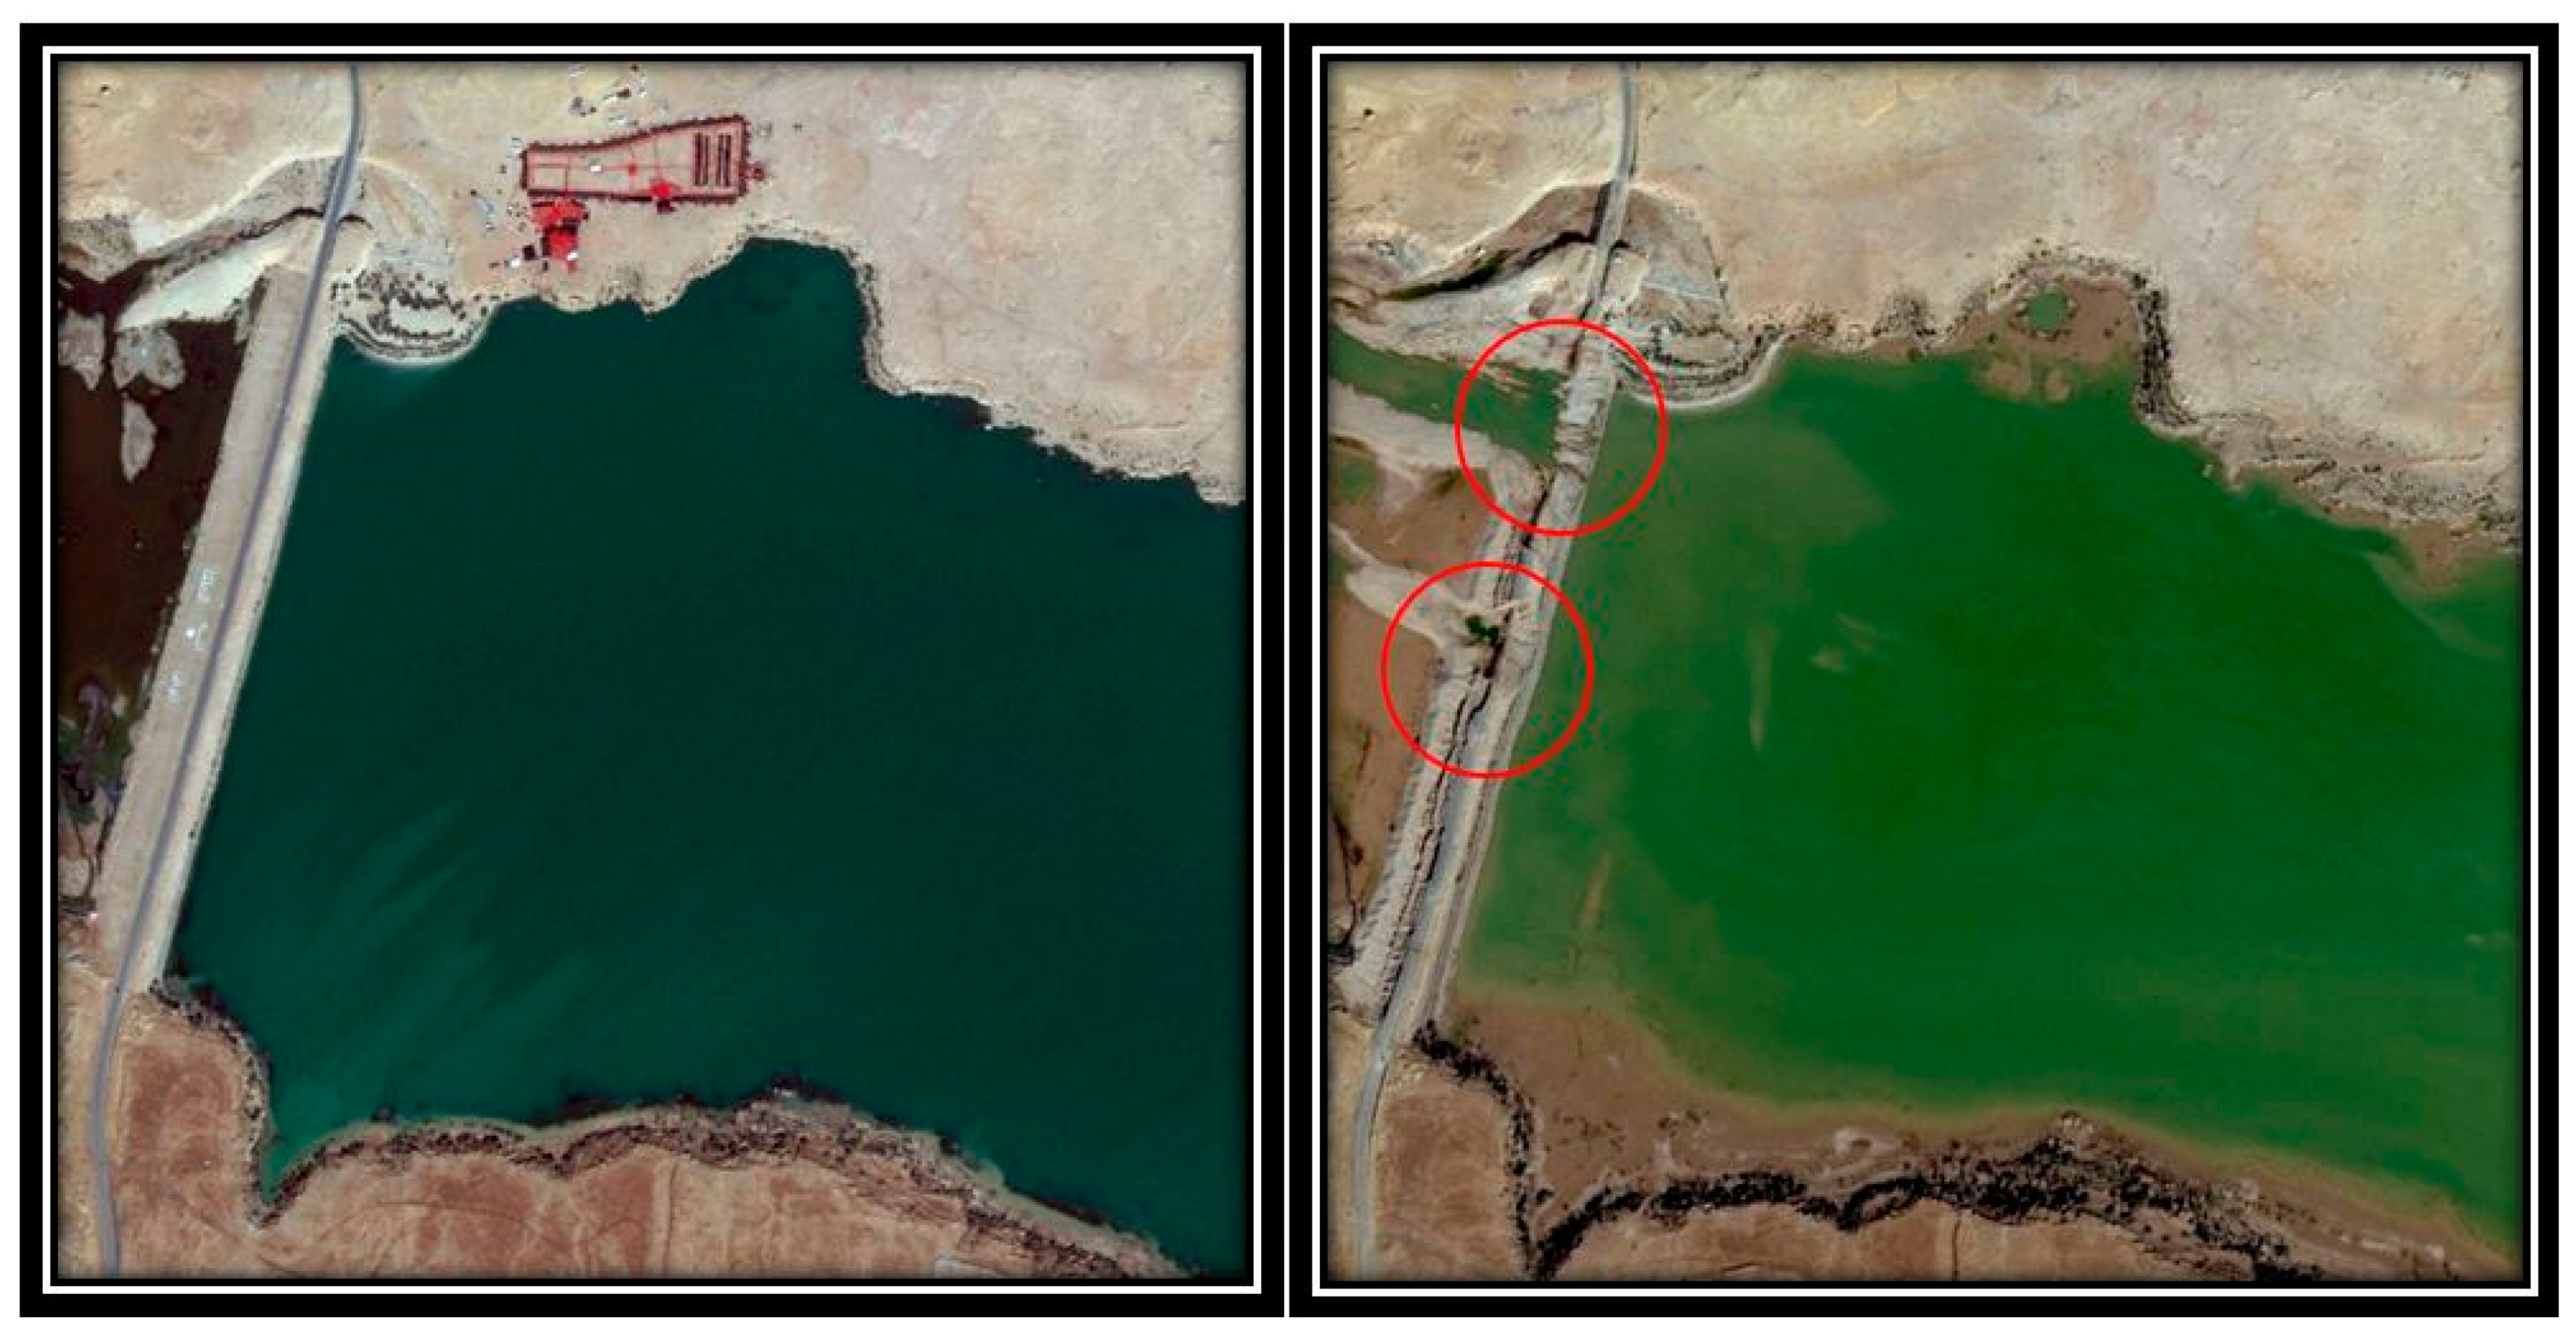 Remote Sensing | Free Full-Text | A Collaborative Change Detection Approach  on Multi-Sensor Spatial Imagery for Desert Wetland Monitoring after a Flash  Flood in Southern Morocco | HTML